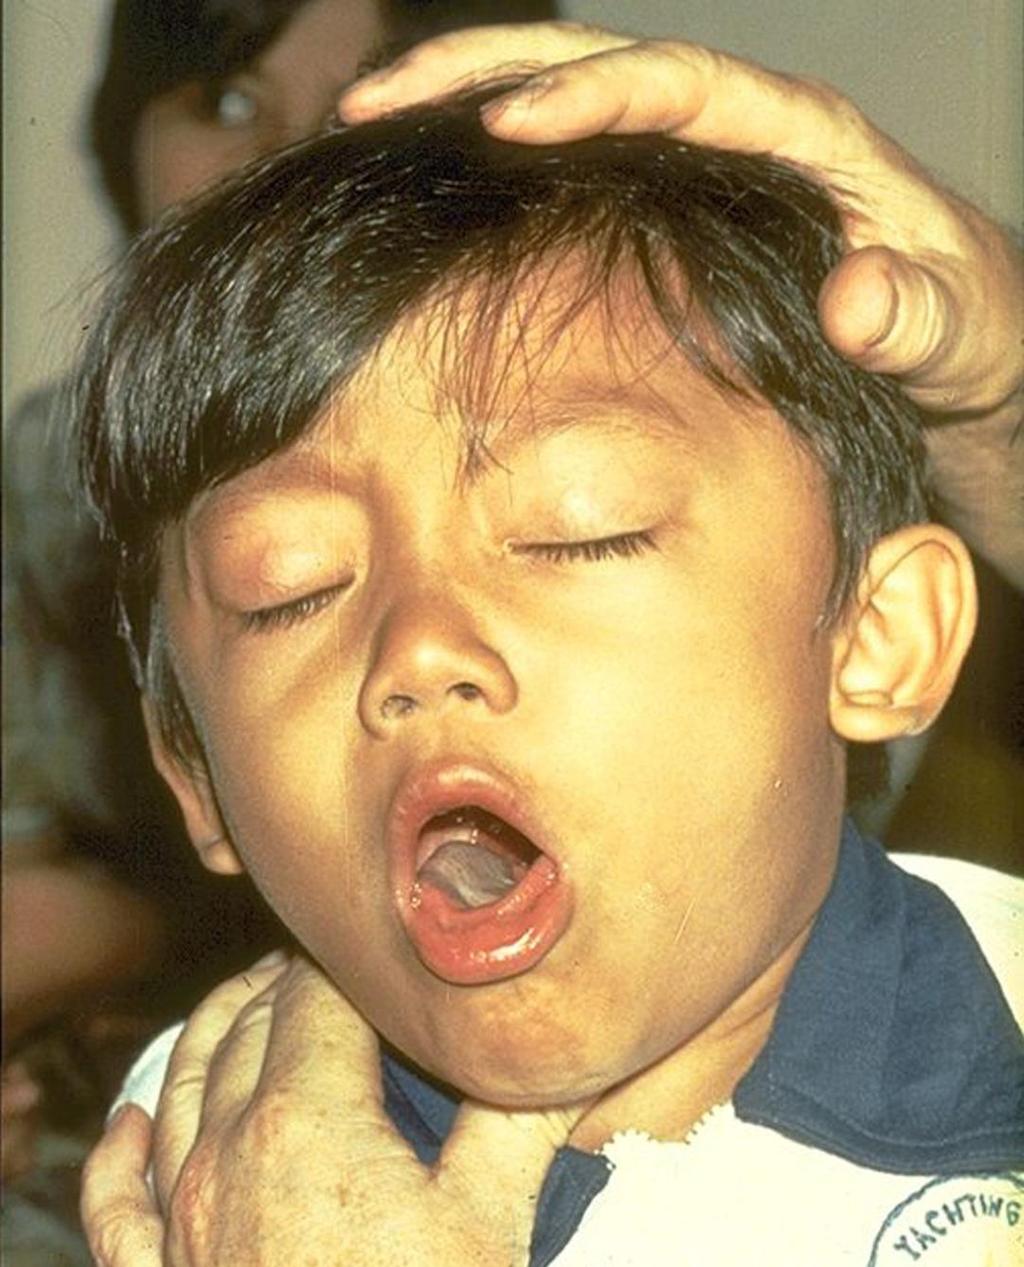 Pertussis (Whooping Cough) Bacteria Severe spasms of coughing interfering with eating, drinking and